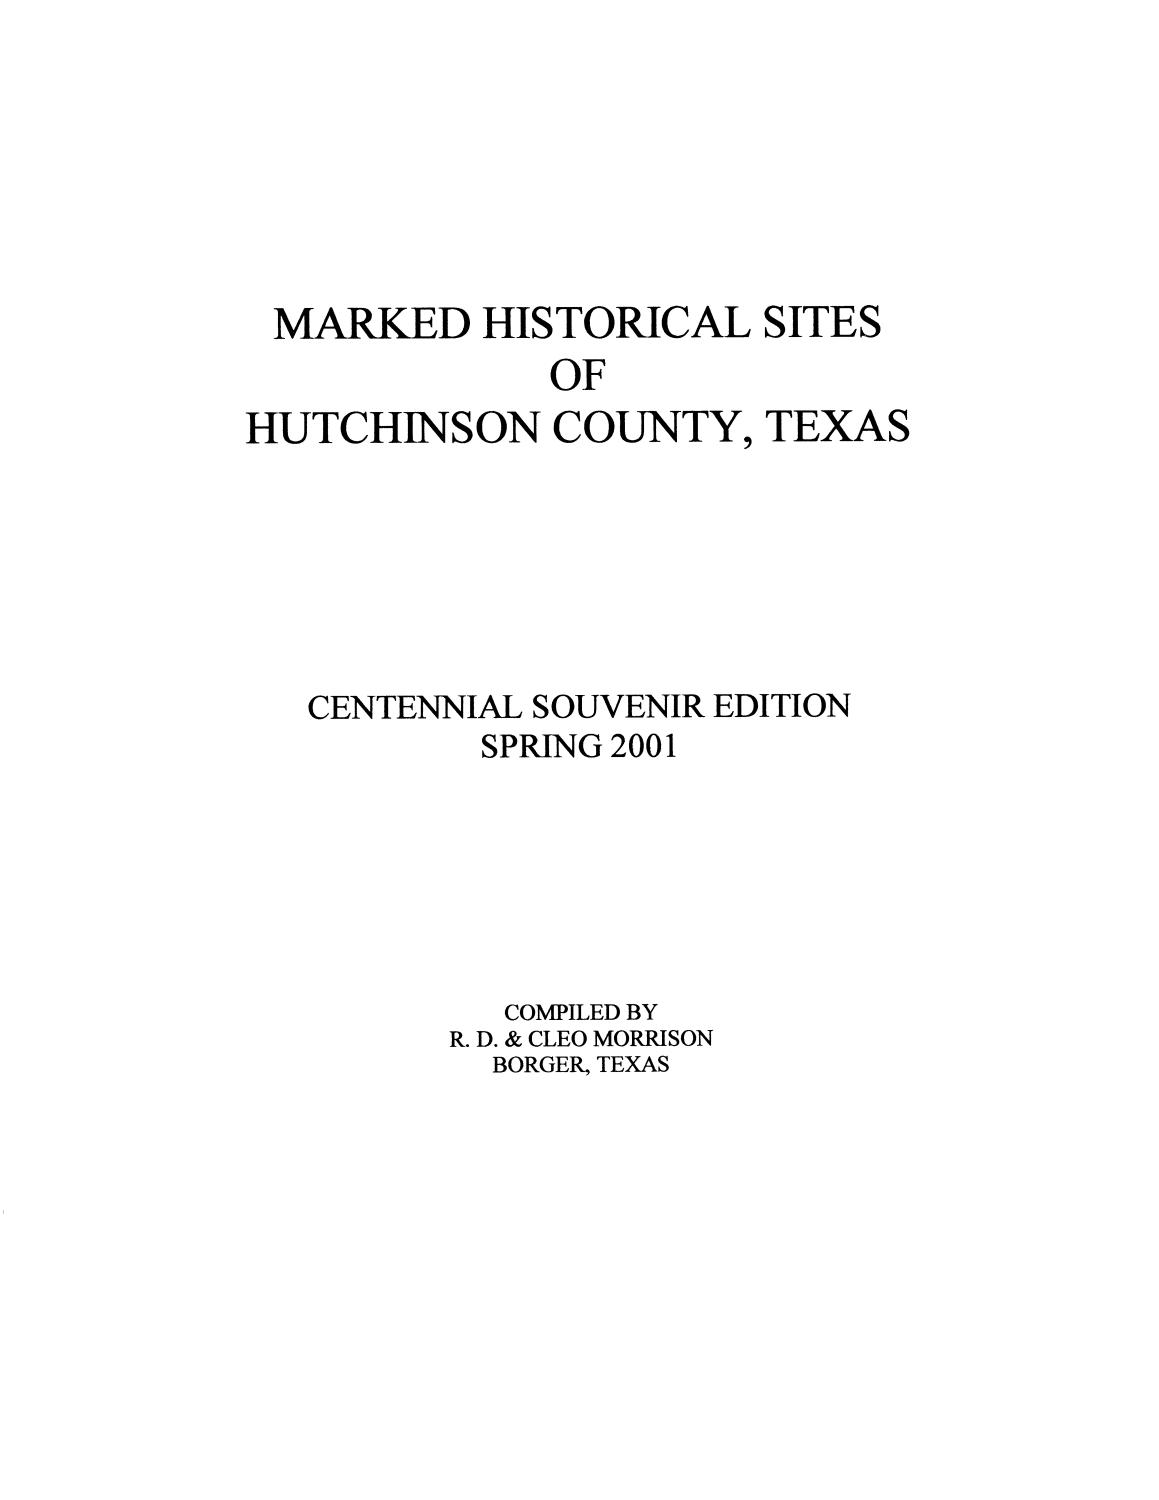 Marked Historical Sites of Hutchinson County, Texas
                                                
                                                    Front Cover
                                                